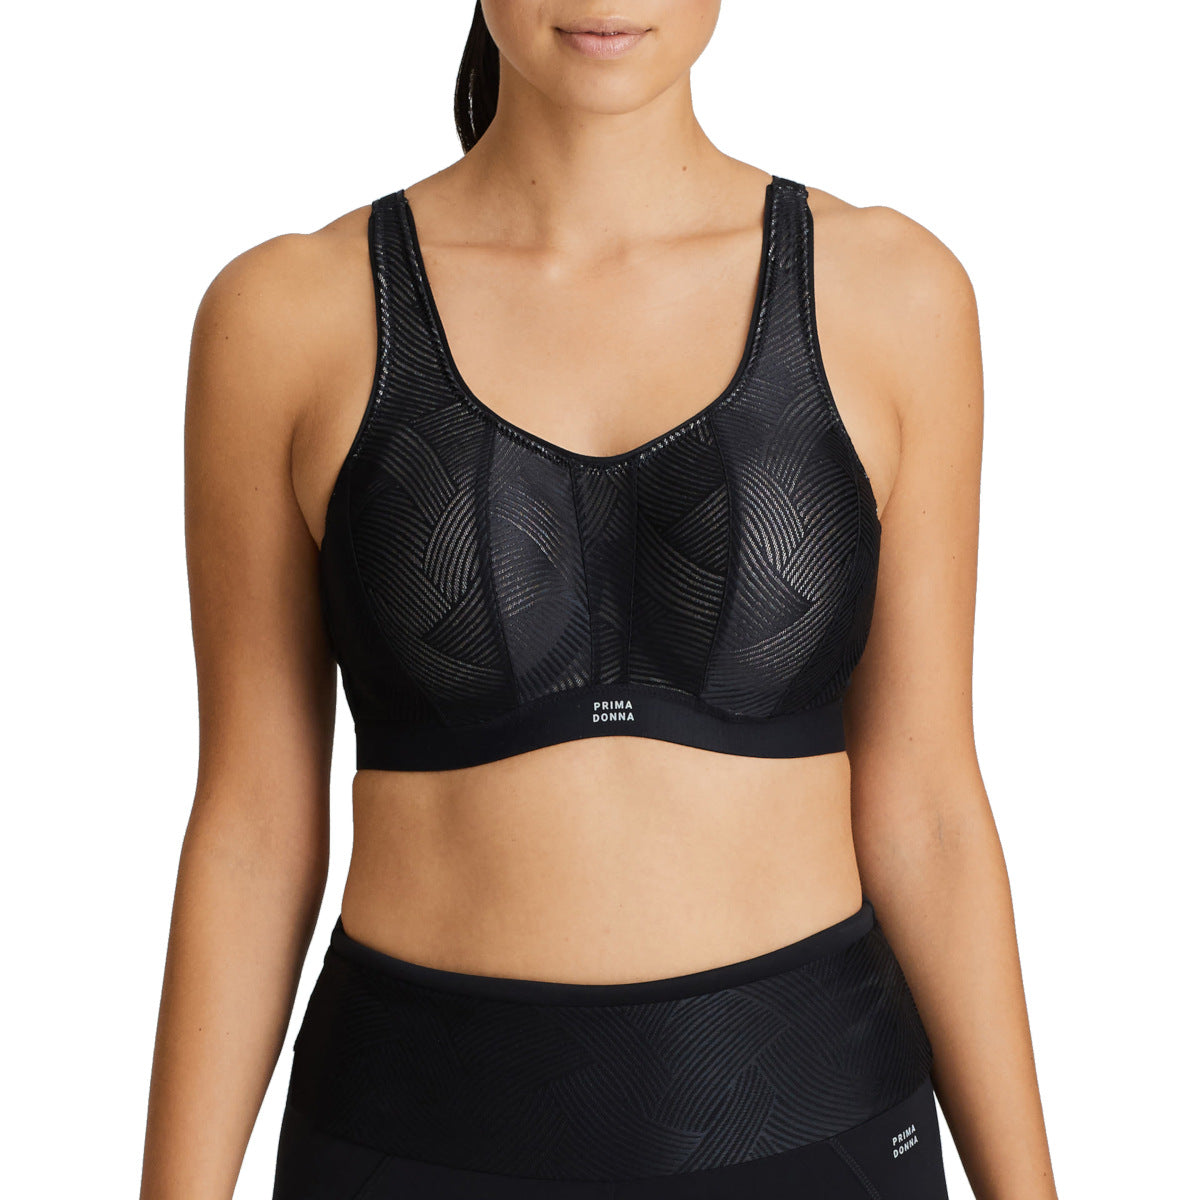 The Sports Bra Story: Only A Beginning